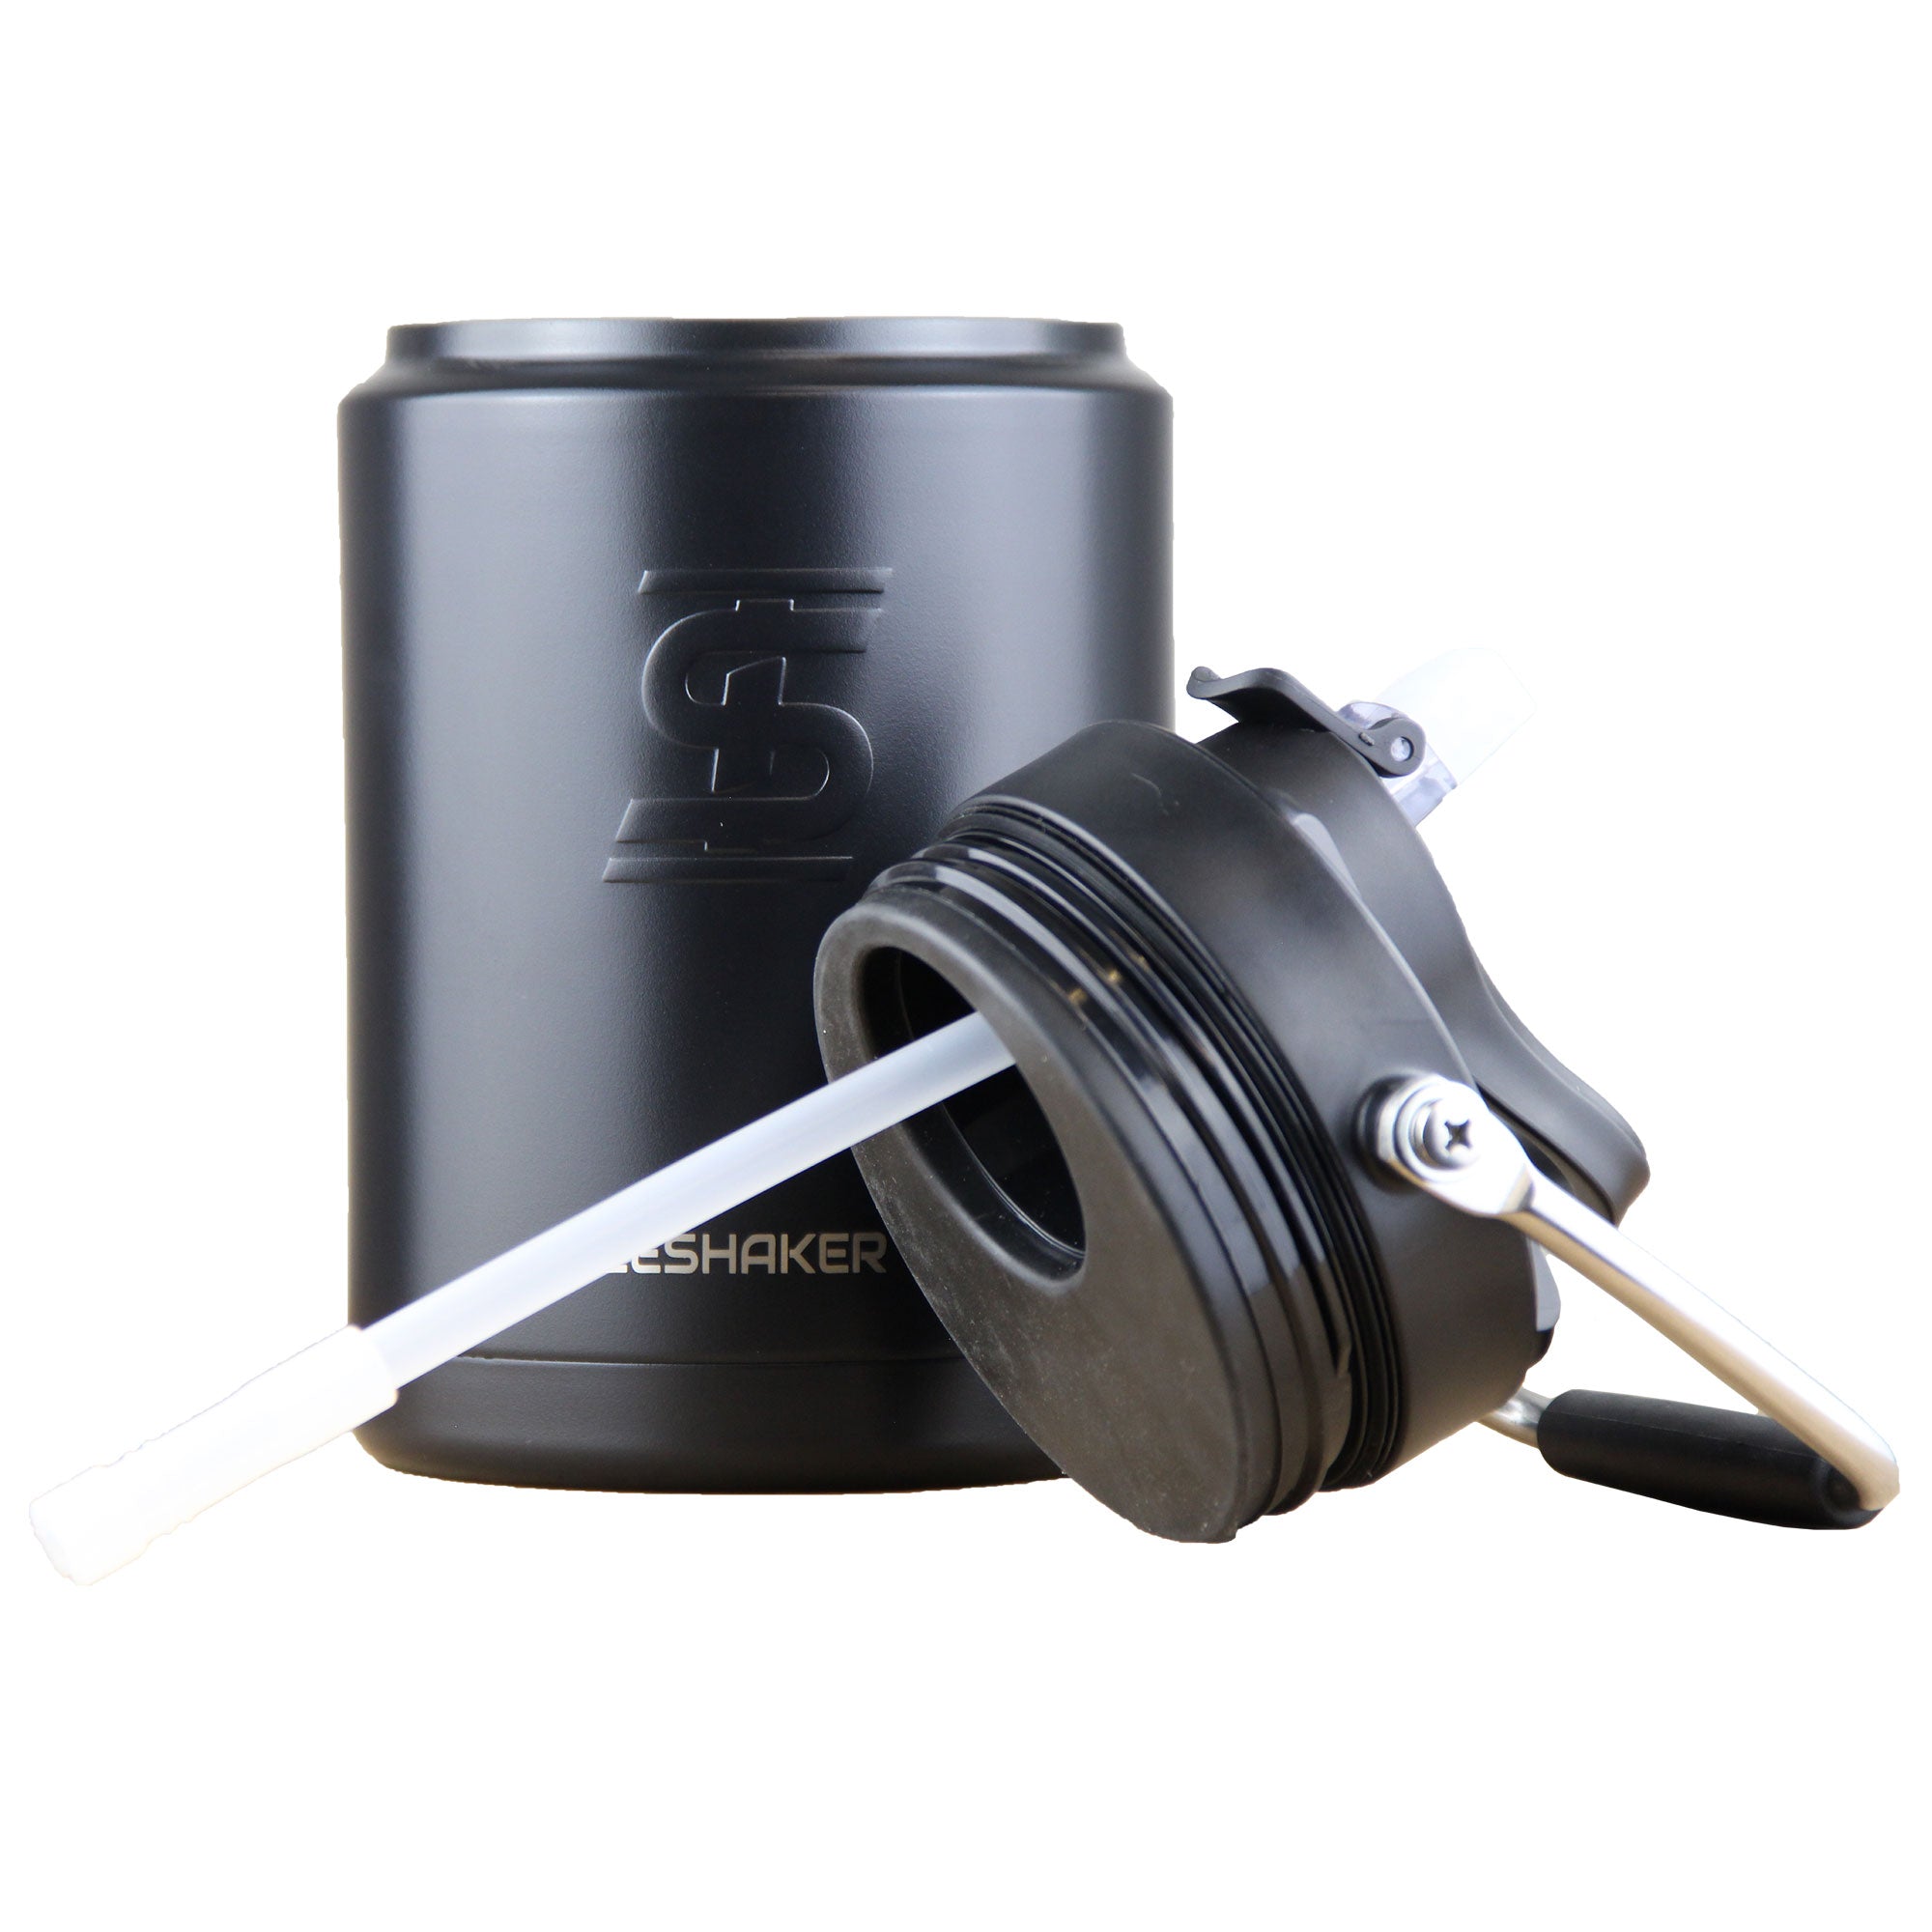 FIT2SERVE As Much Rest As Possible Half Gallon Jug - Black